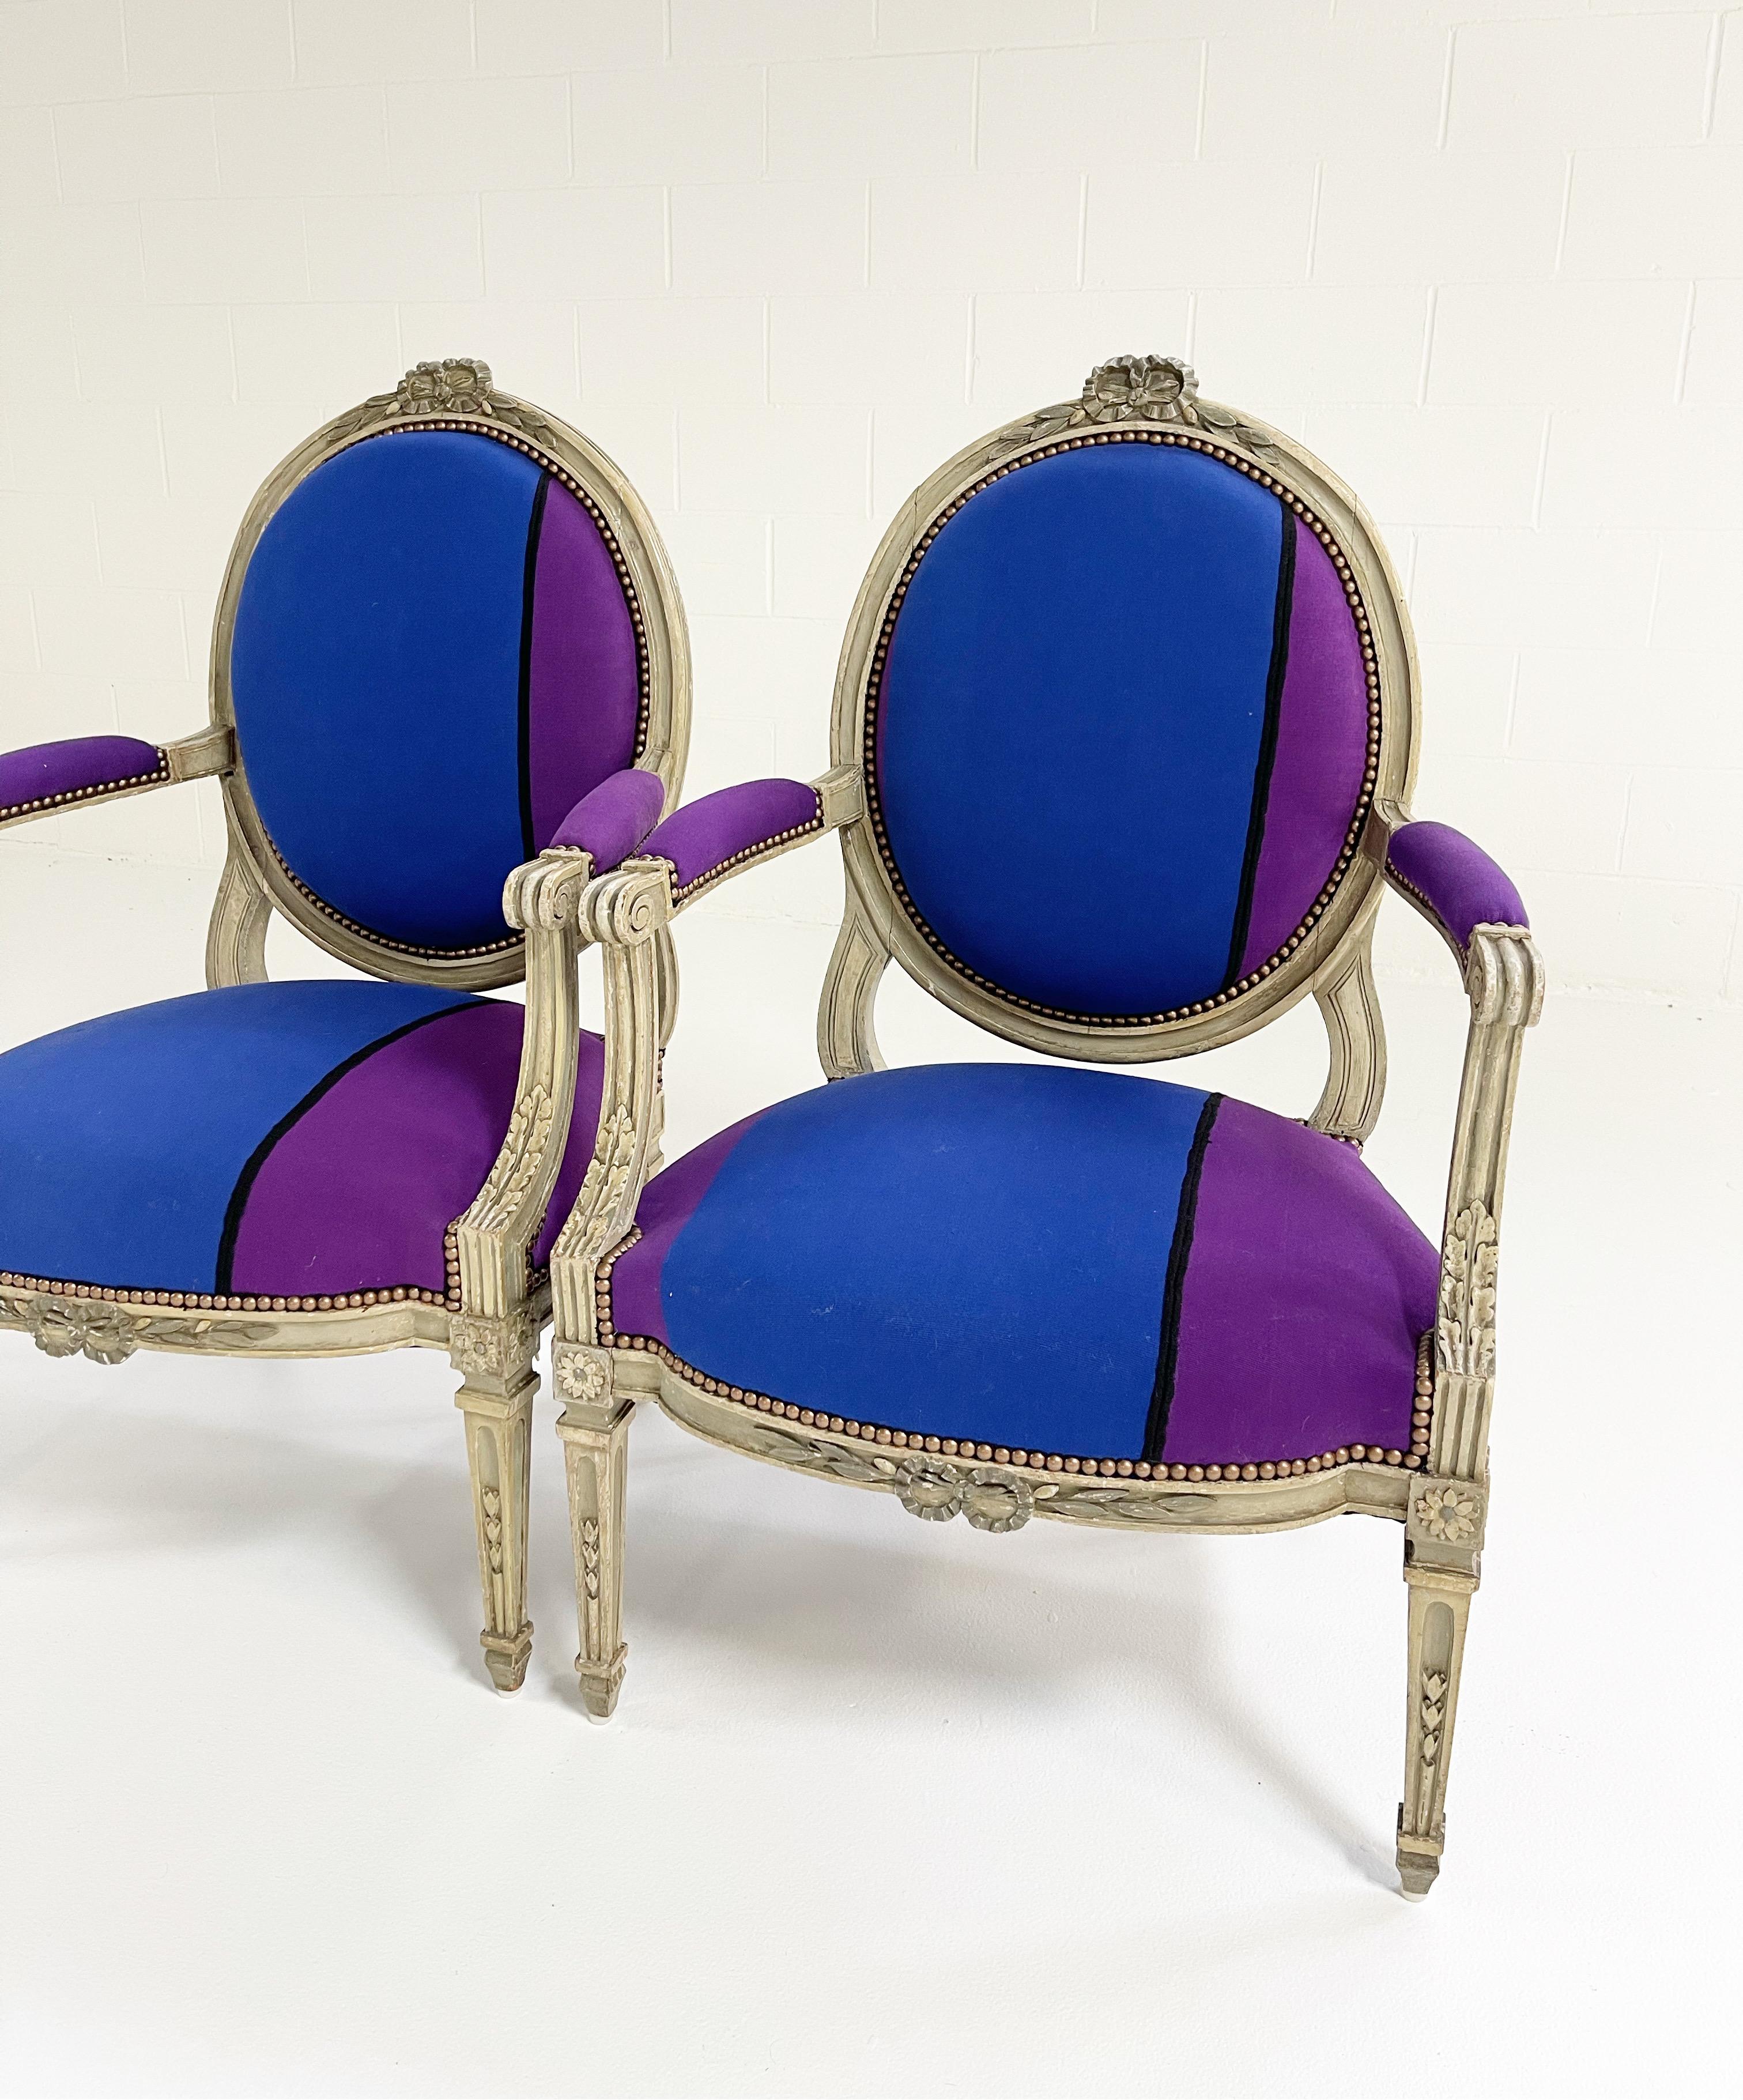 This beautiful pair is a show-stopper. During restoration, the chairs were completely rebuilt. For the finish, we chose the gorgeous Cristobal Throws by fashion brand, Colville. The vibrant colors and pattern create a modern piece destined for an